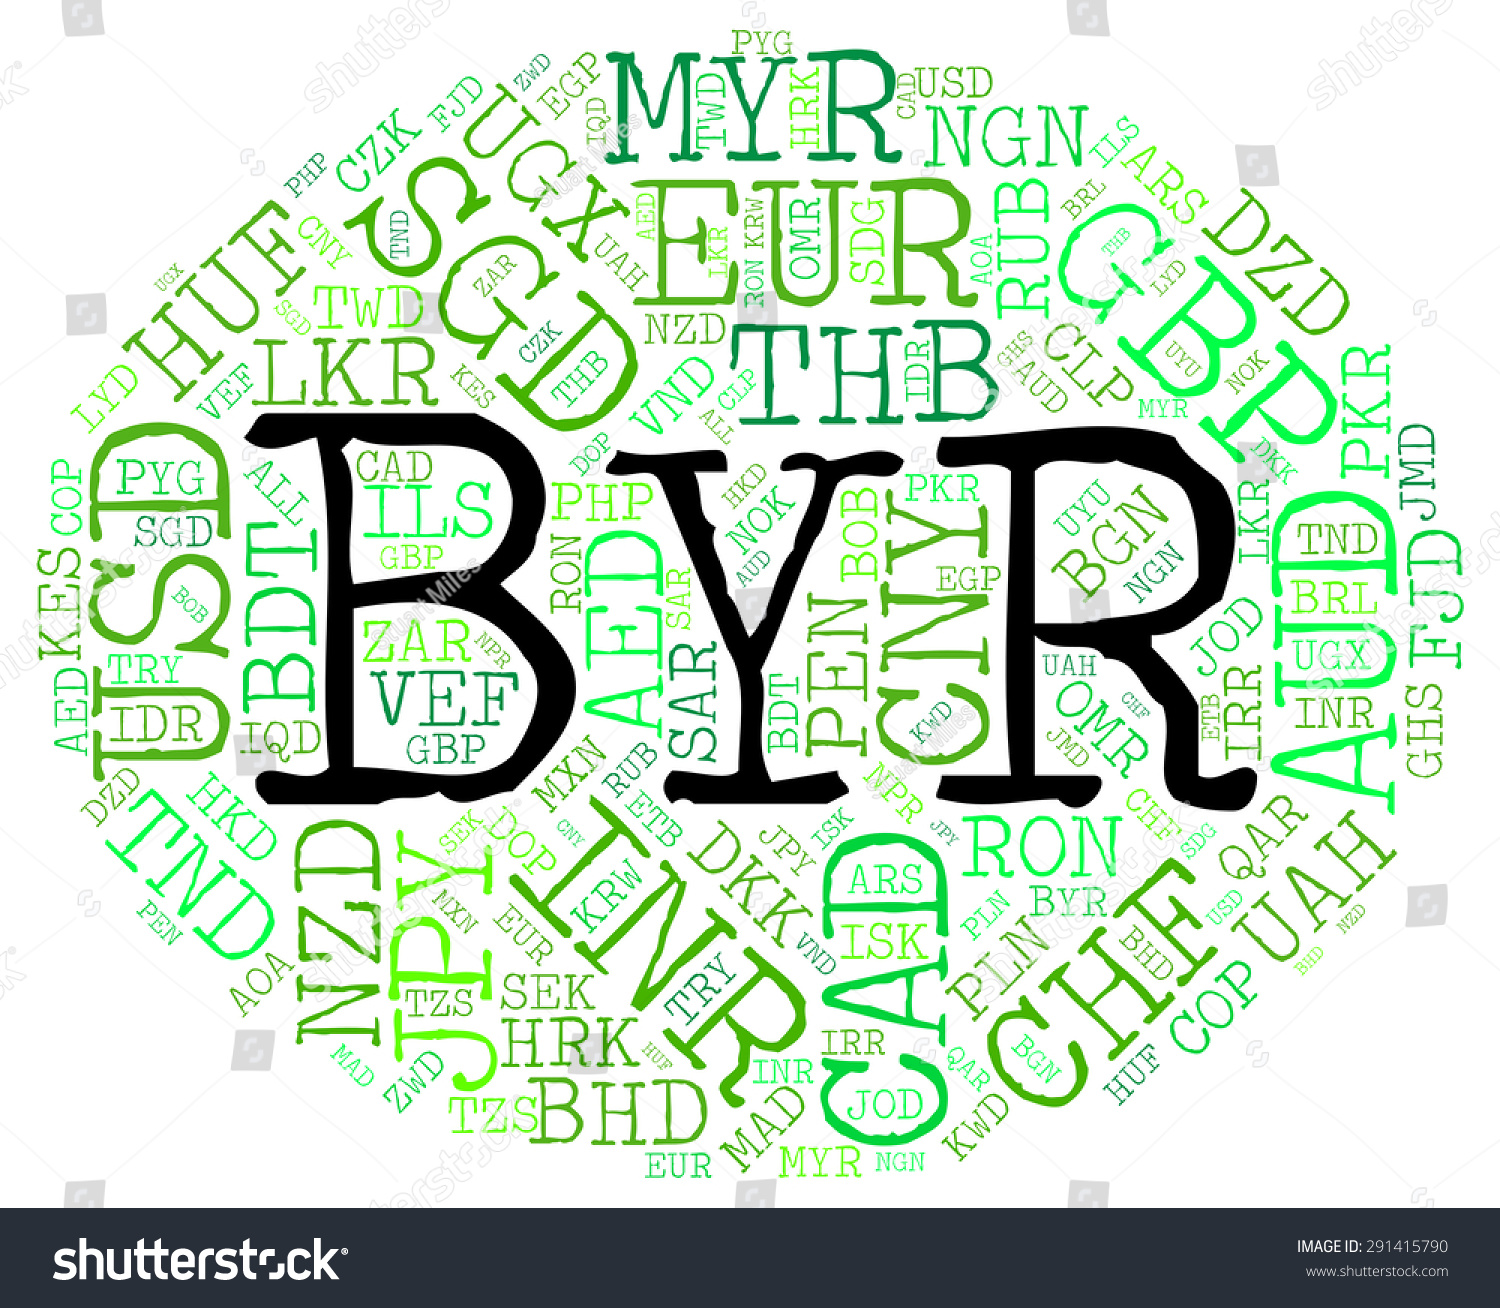 Byr Currency Meaning Stock Illustration 291415790 - Shutterstock